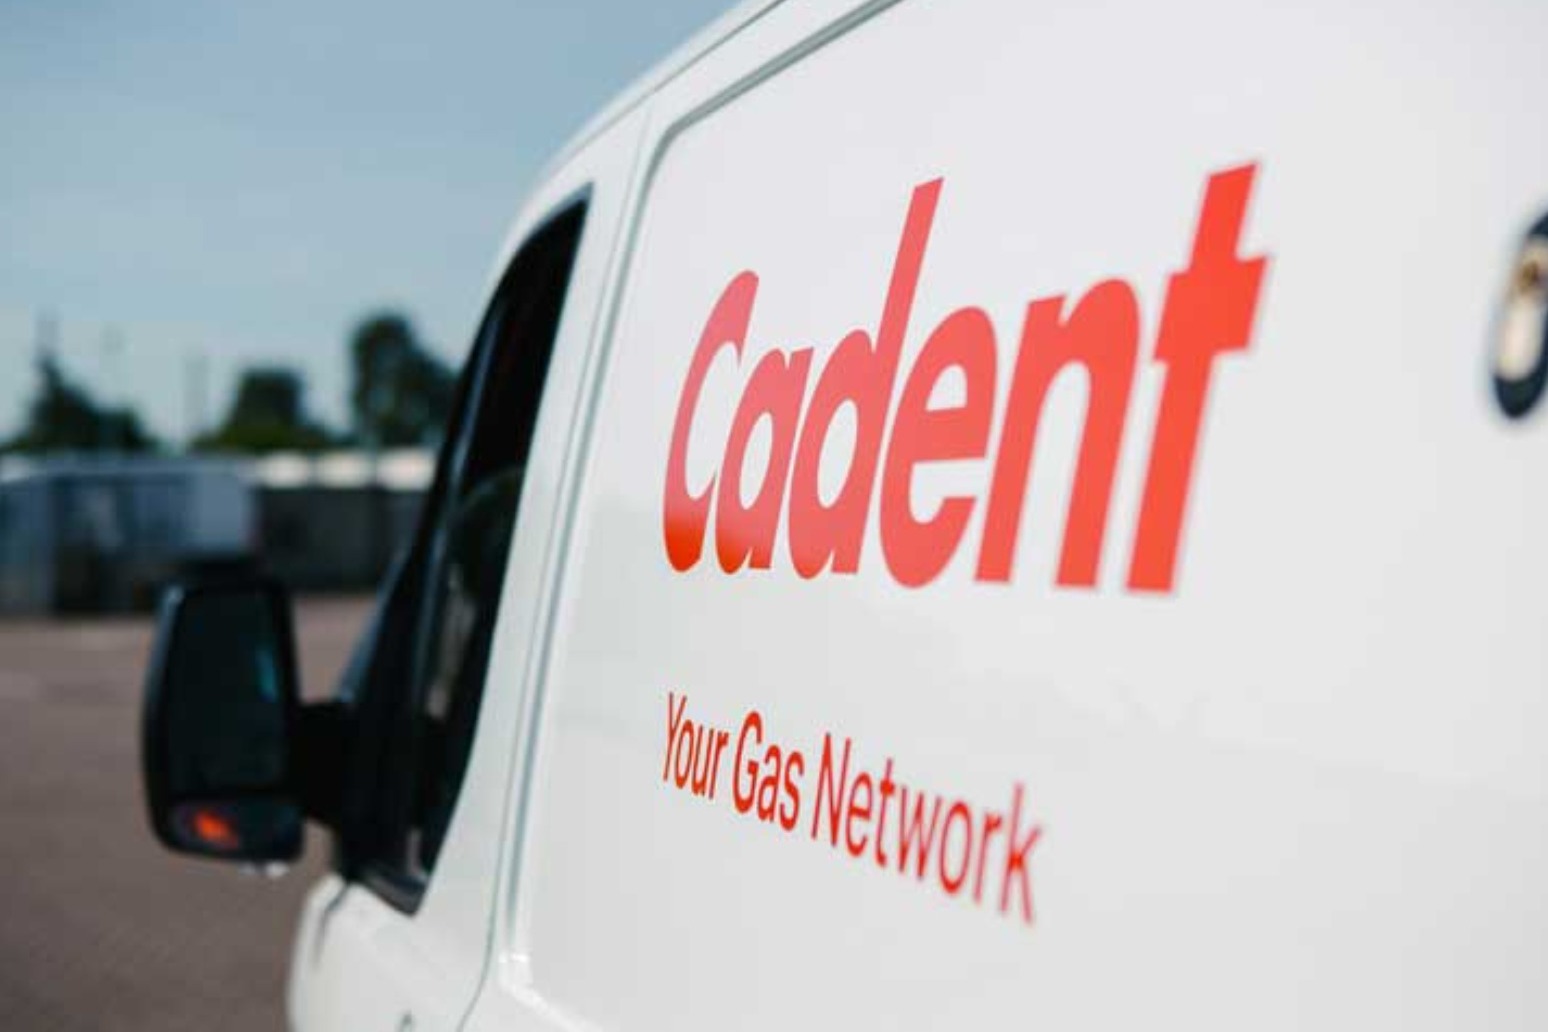 Gas workers to vote on strikes over pay